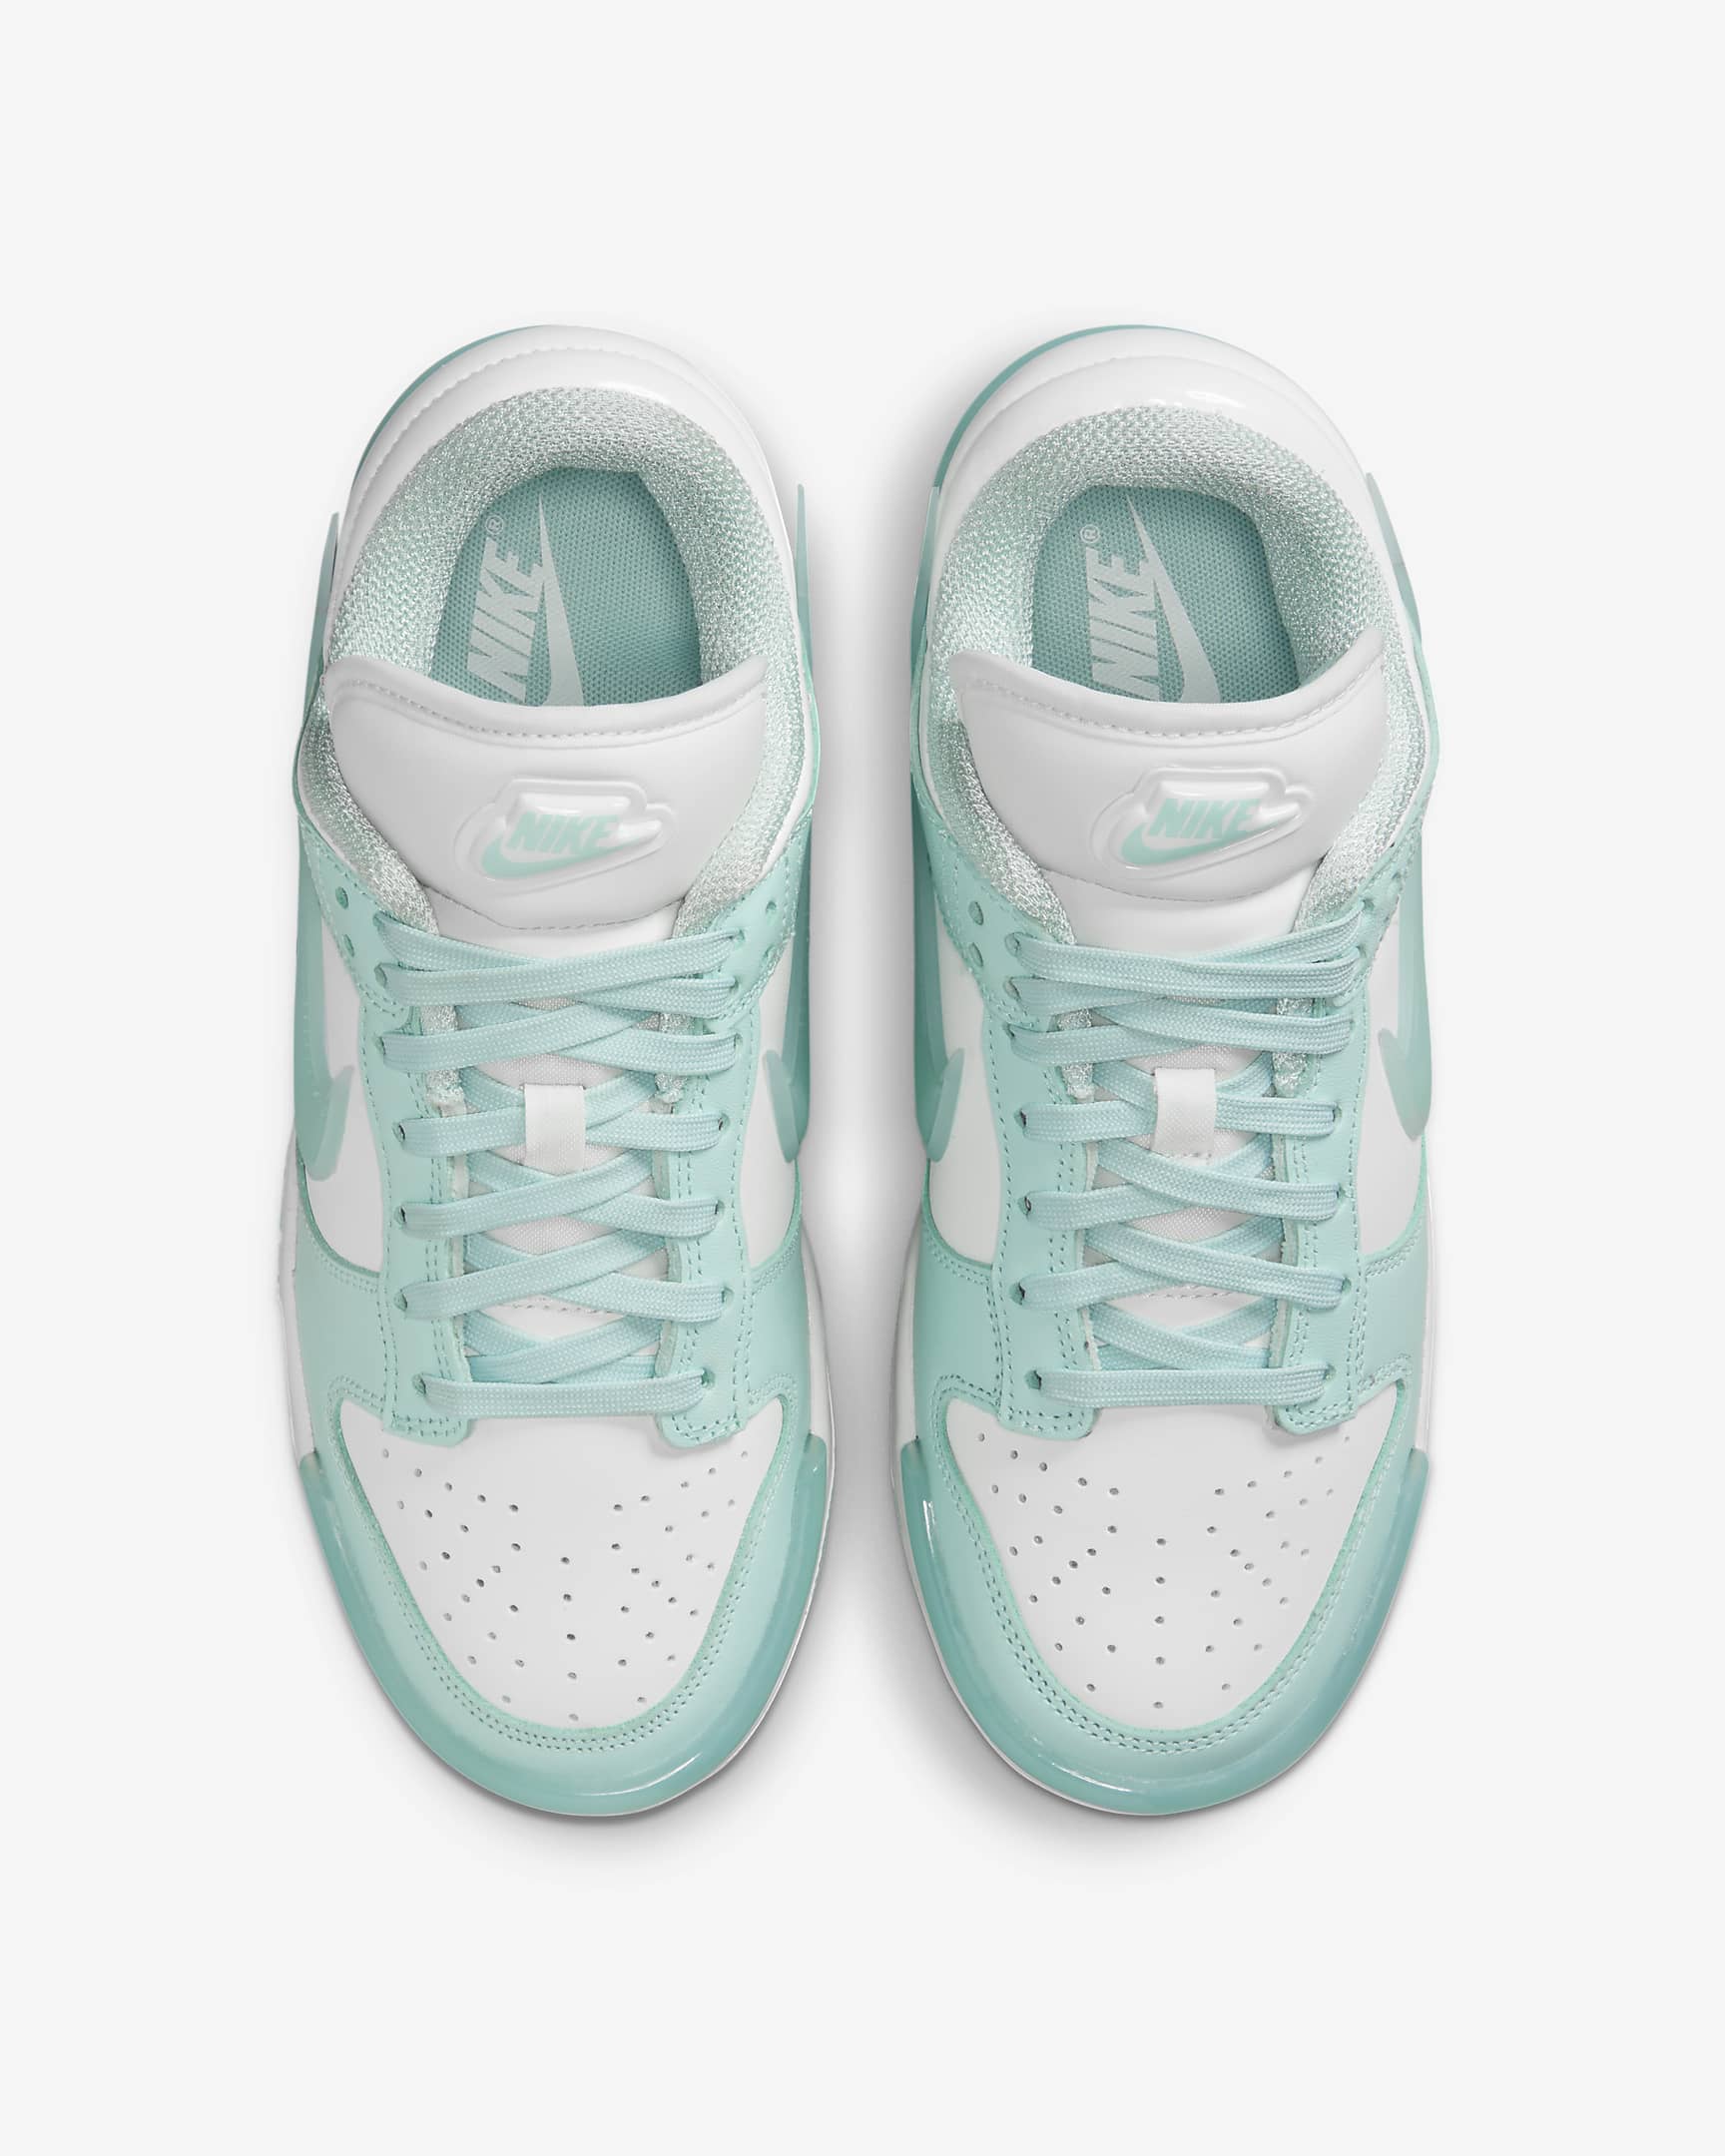 Nike Dunk Low Twist Jade Ice Review-The ’80s b-ball icon returns with classic details